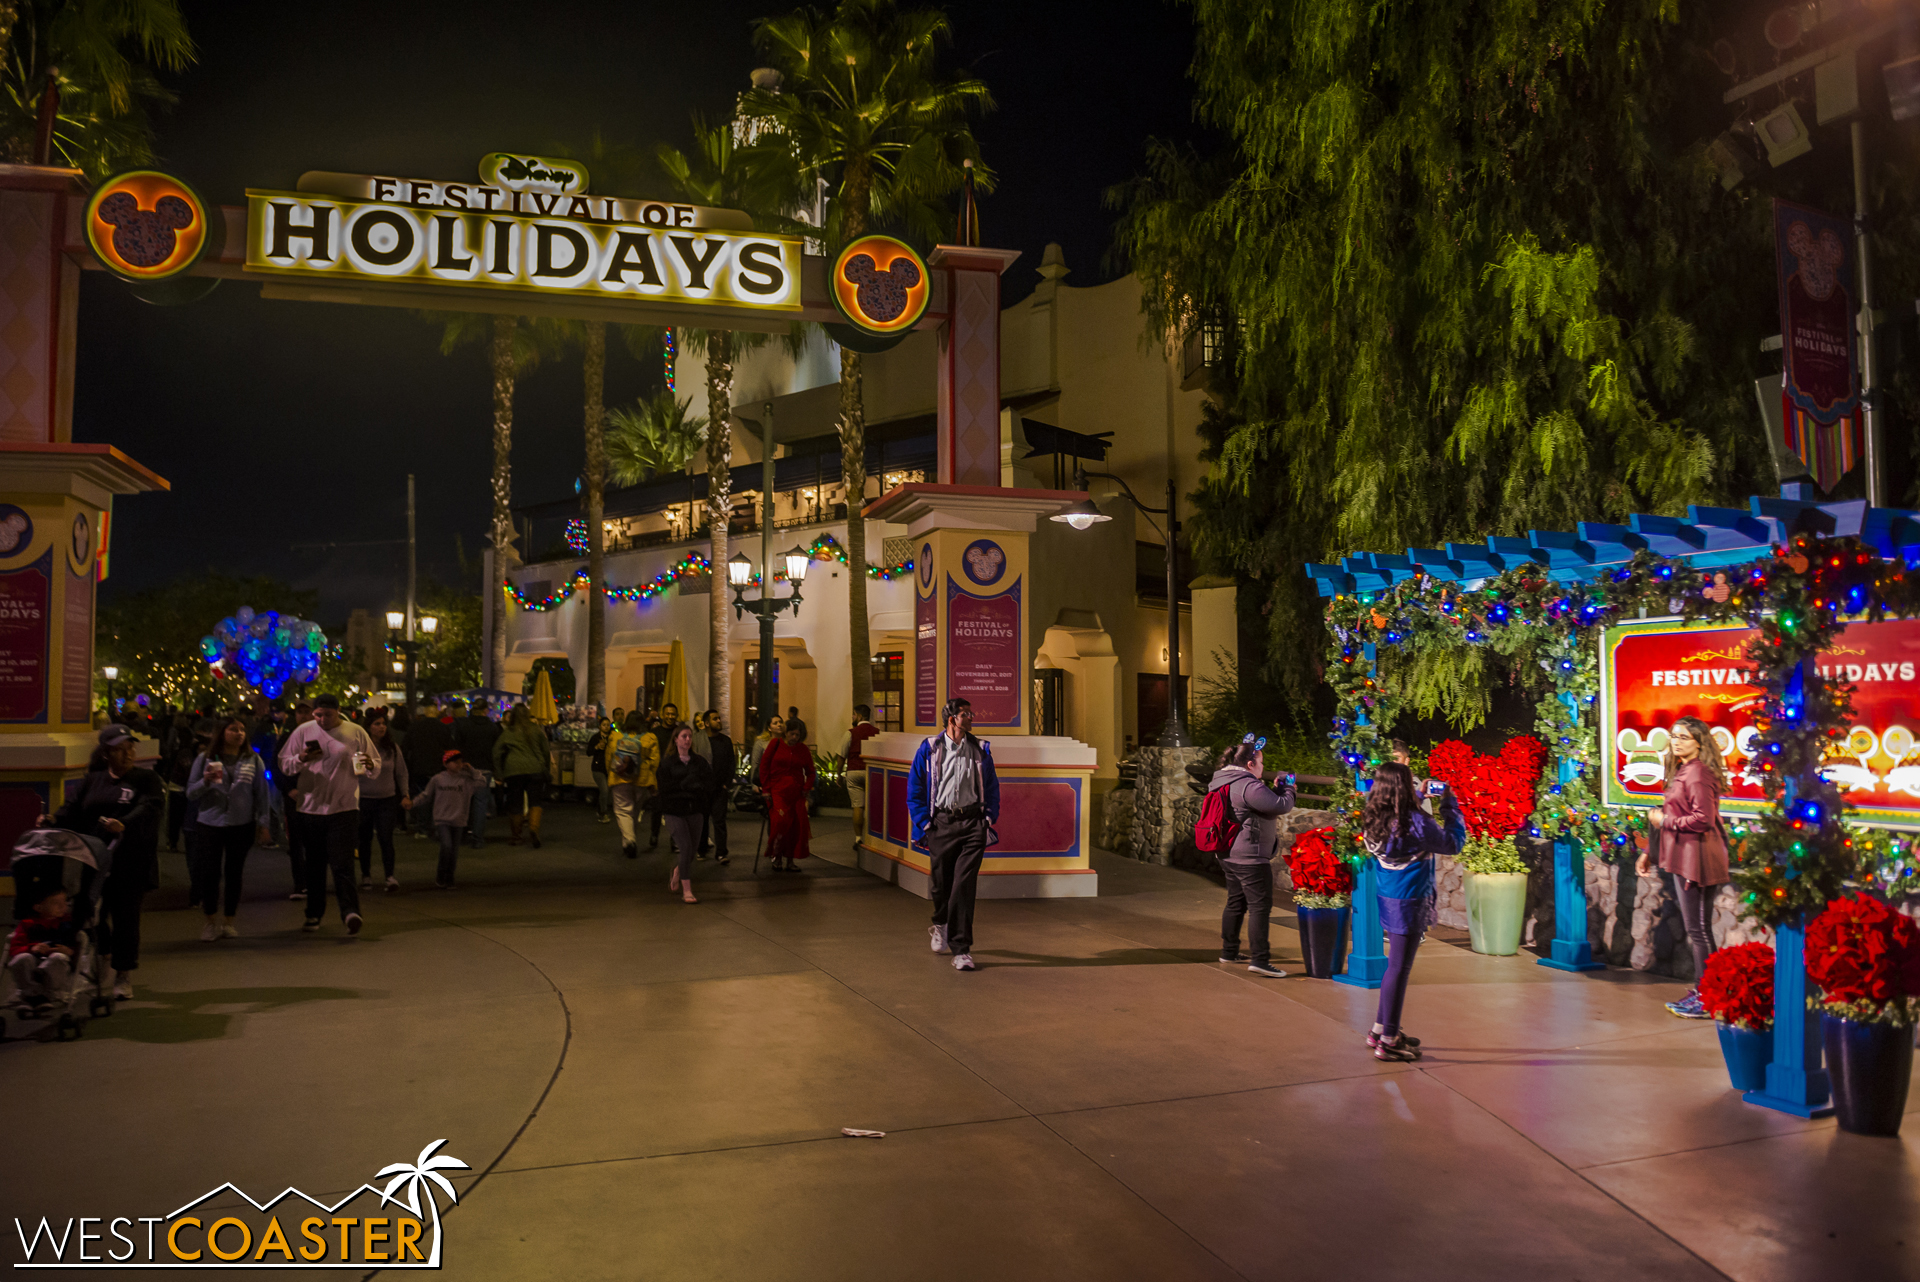  The Festival of Holidays is back for its second year! 